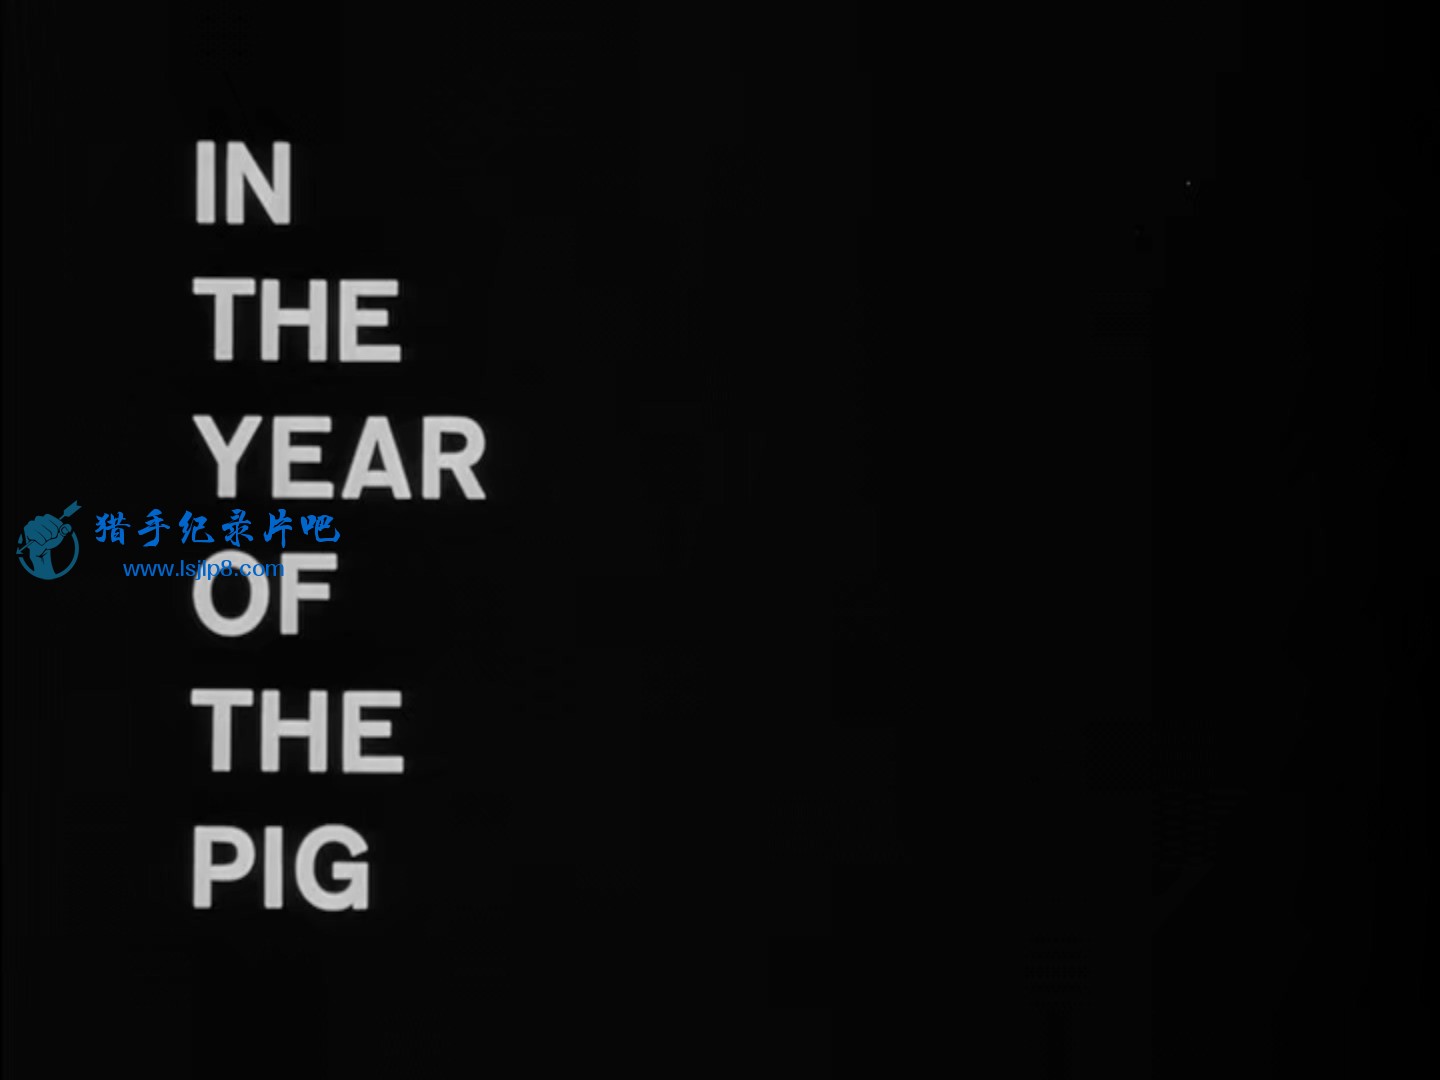 In.The.Year.Of.The.Pig.1968.480p.2ch.Commentary.3subs.x265.mkv_20210825_122327.819.jpg